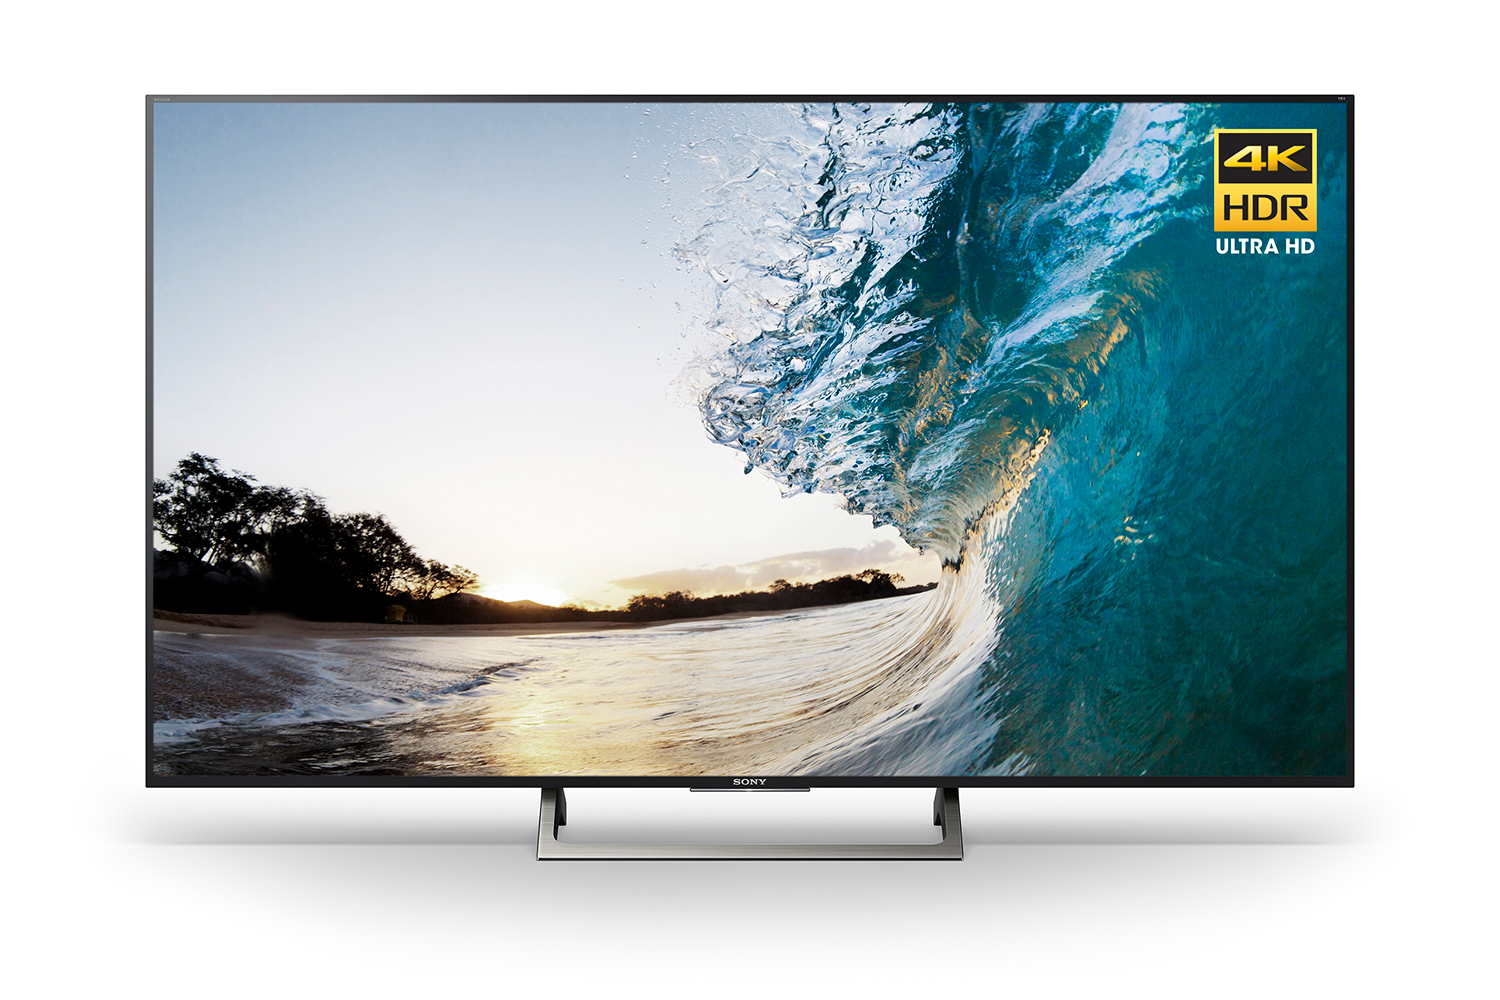 Sony 43" 4K Ultra HD LED Smart TV with Android OS & Voice RemoteXBR43X800E 